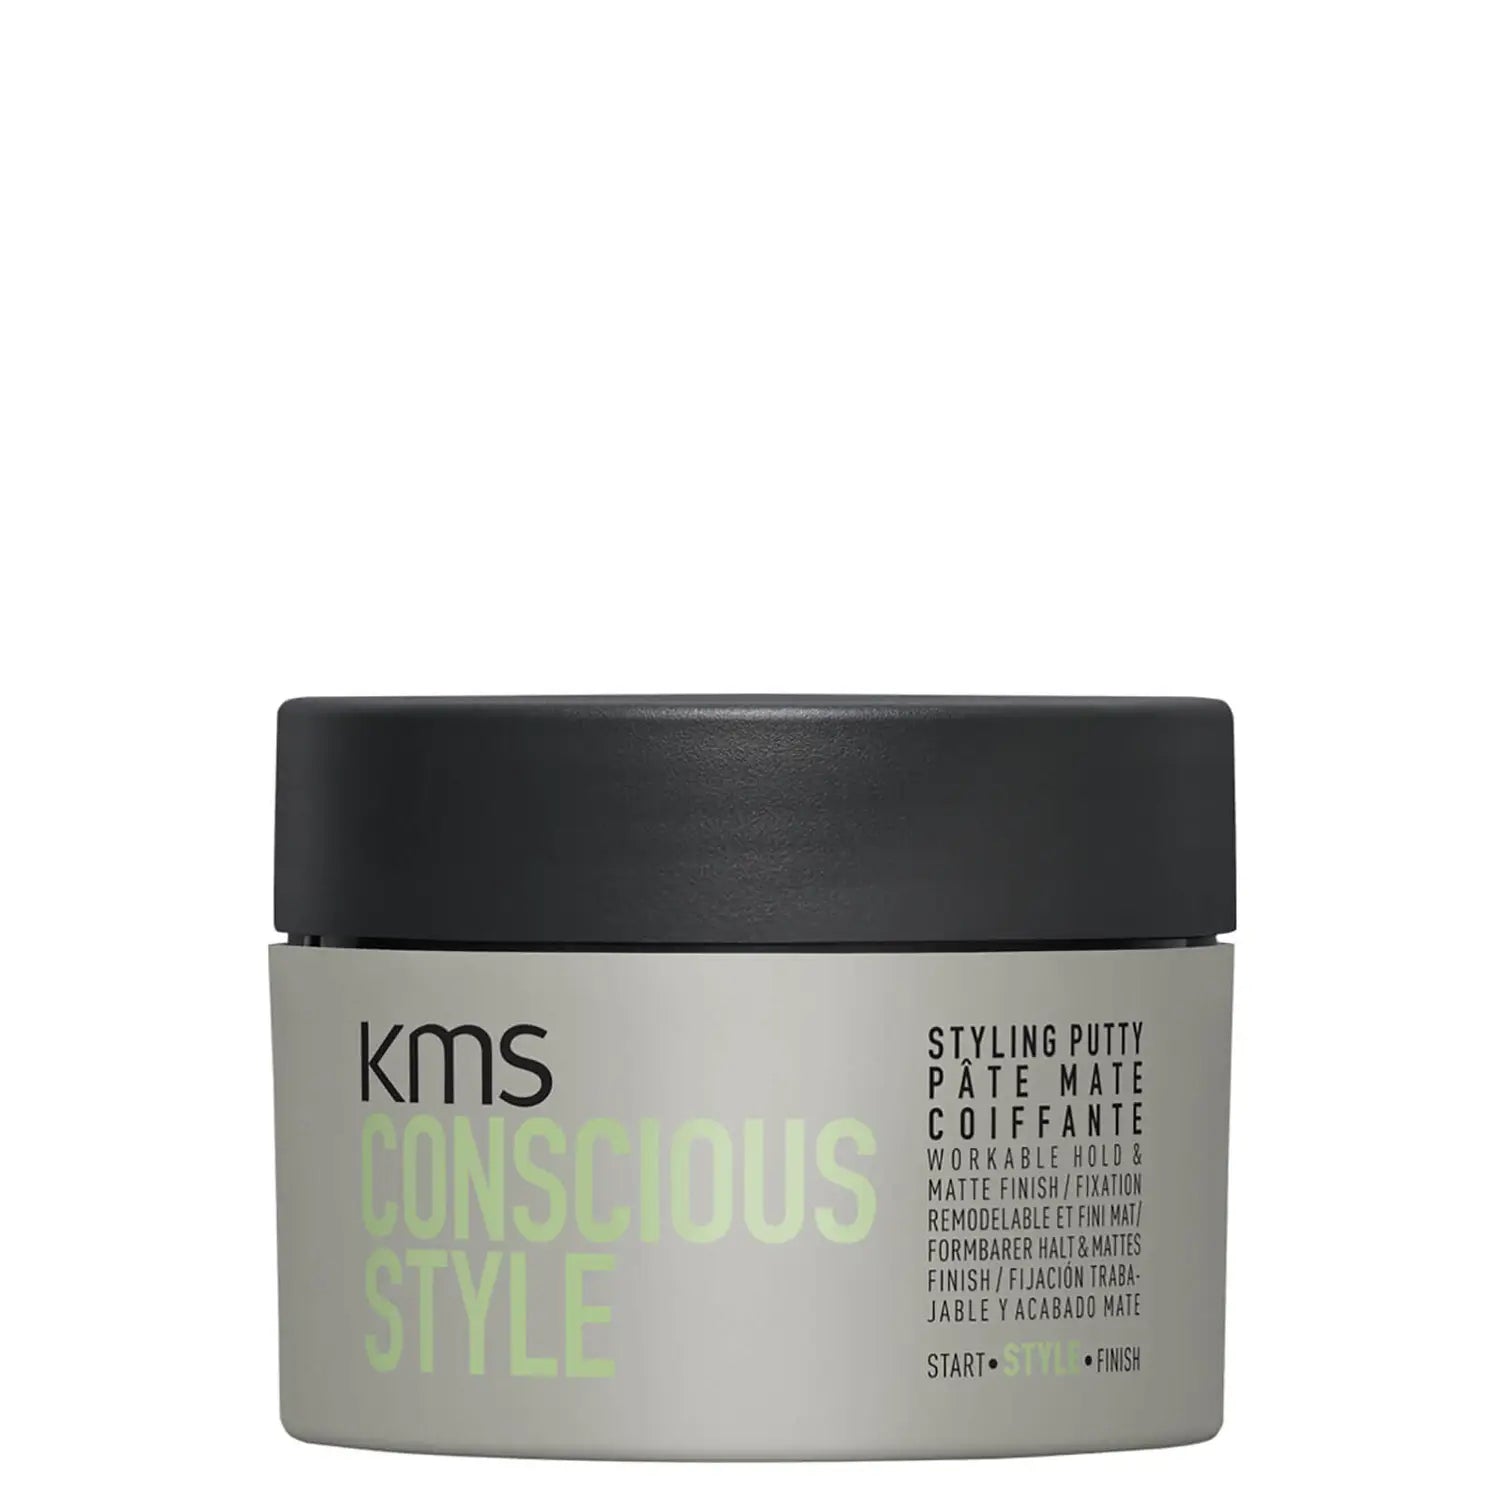 KMS Conscious Style Styling Putty 75ml - KMS